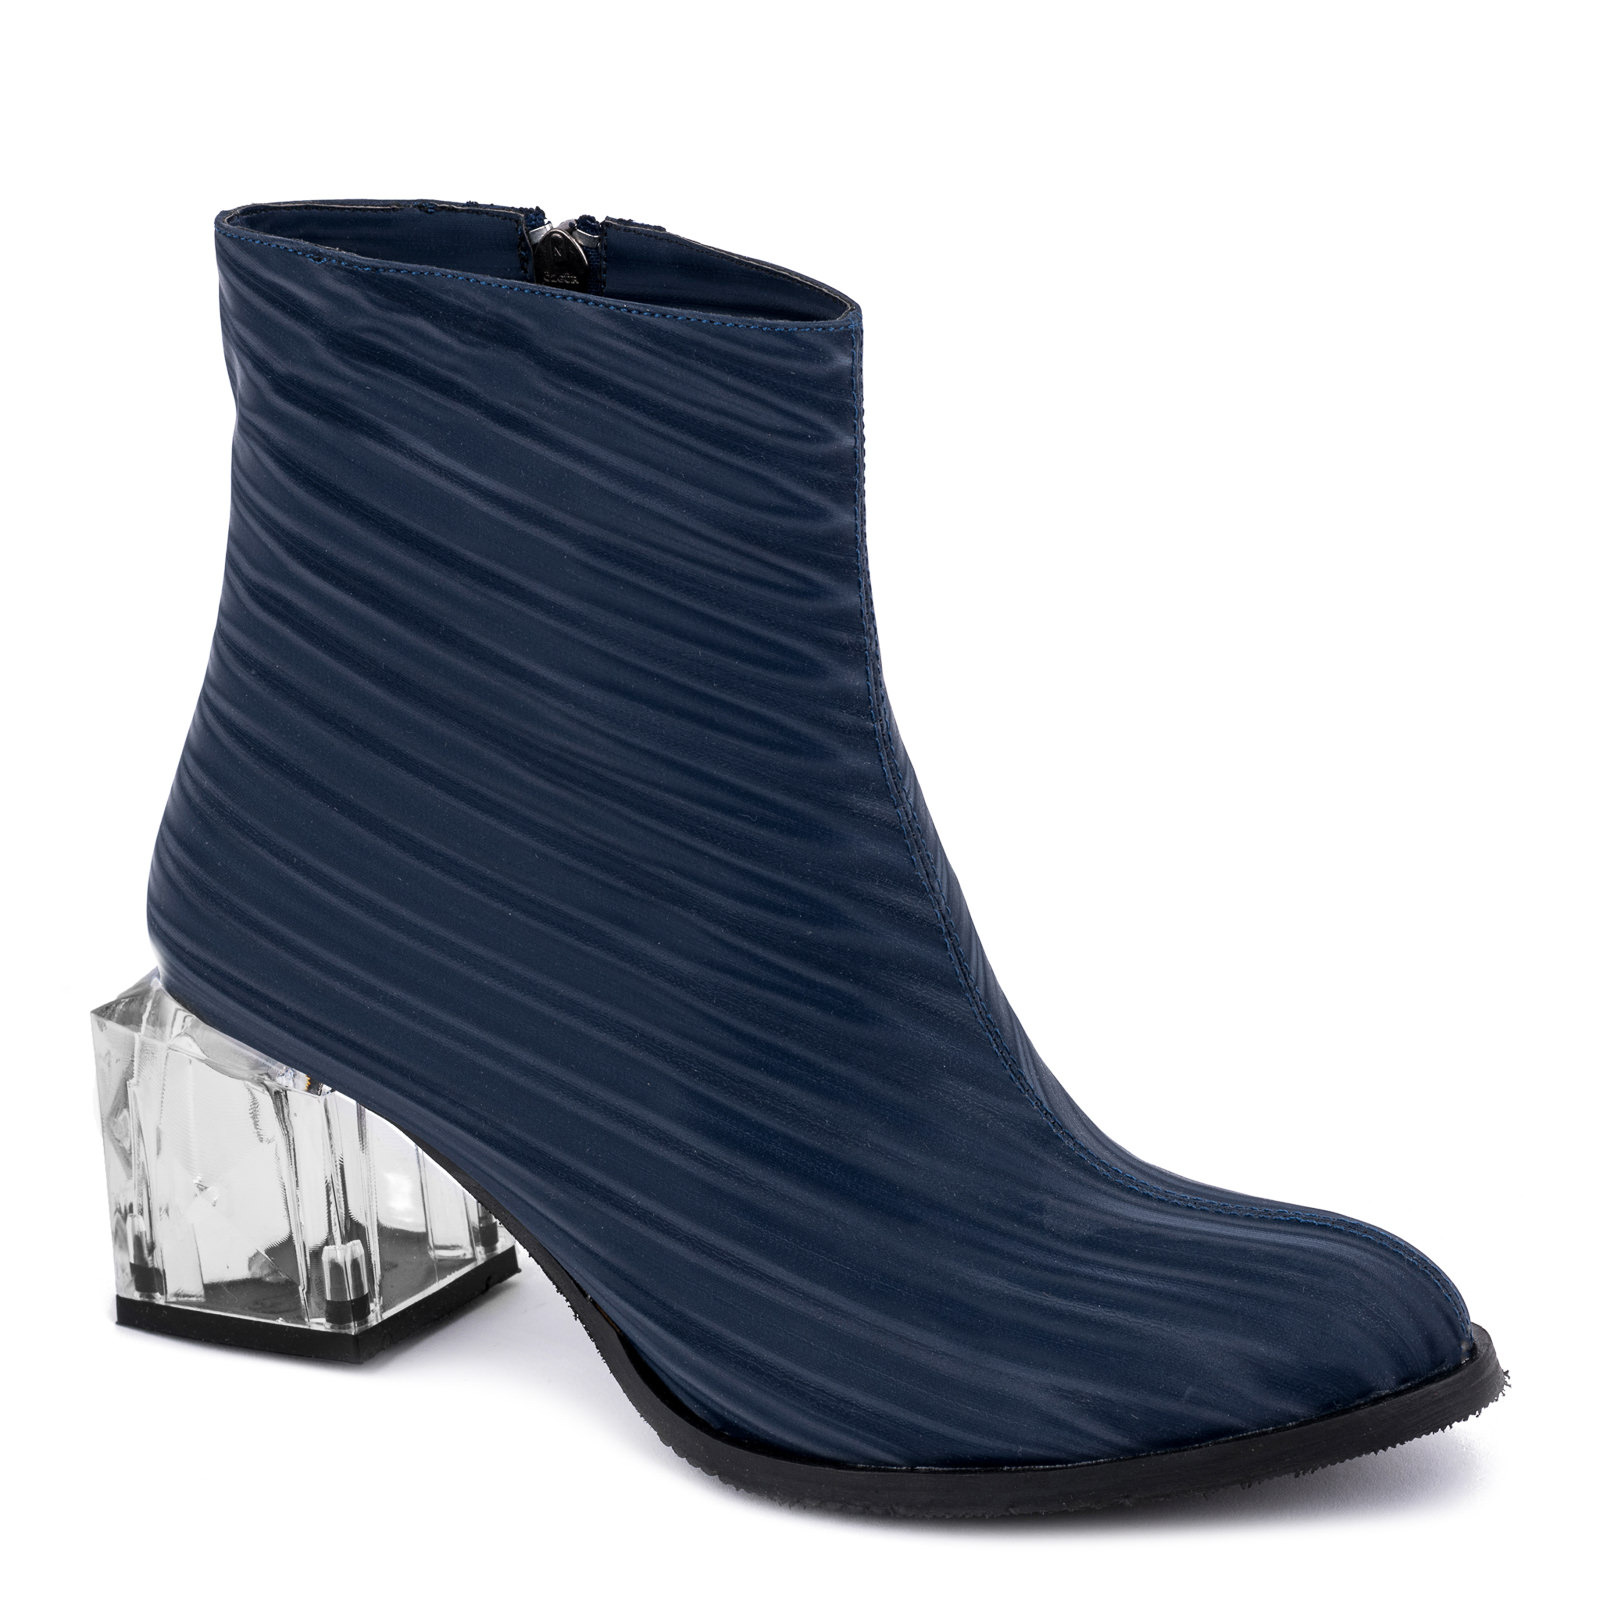 ANKLE BOOTS WITH CLEAR BLOCK HEEL - NAVY BLUE